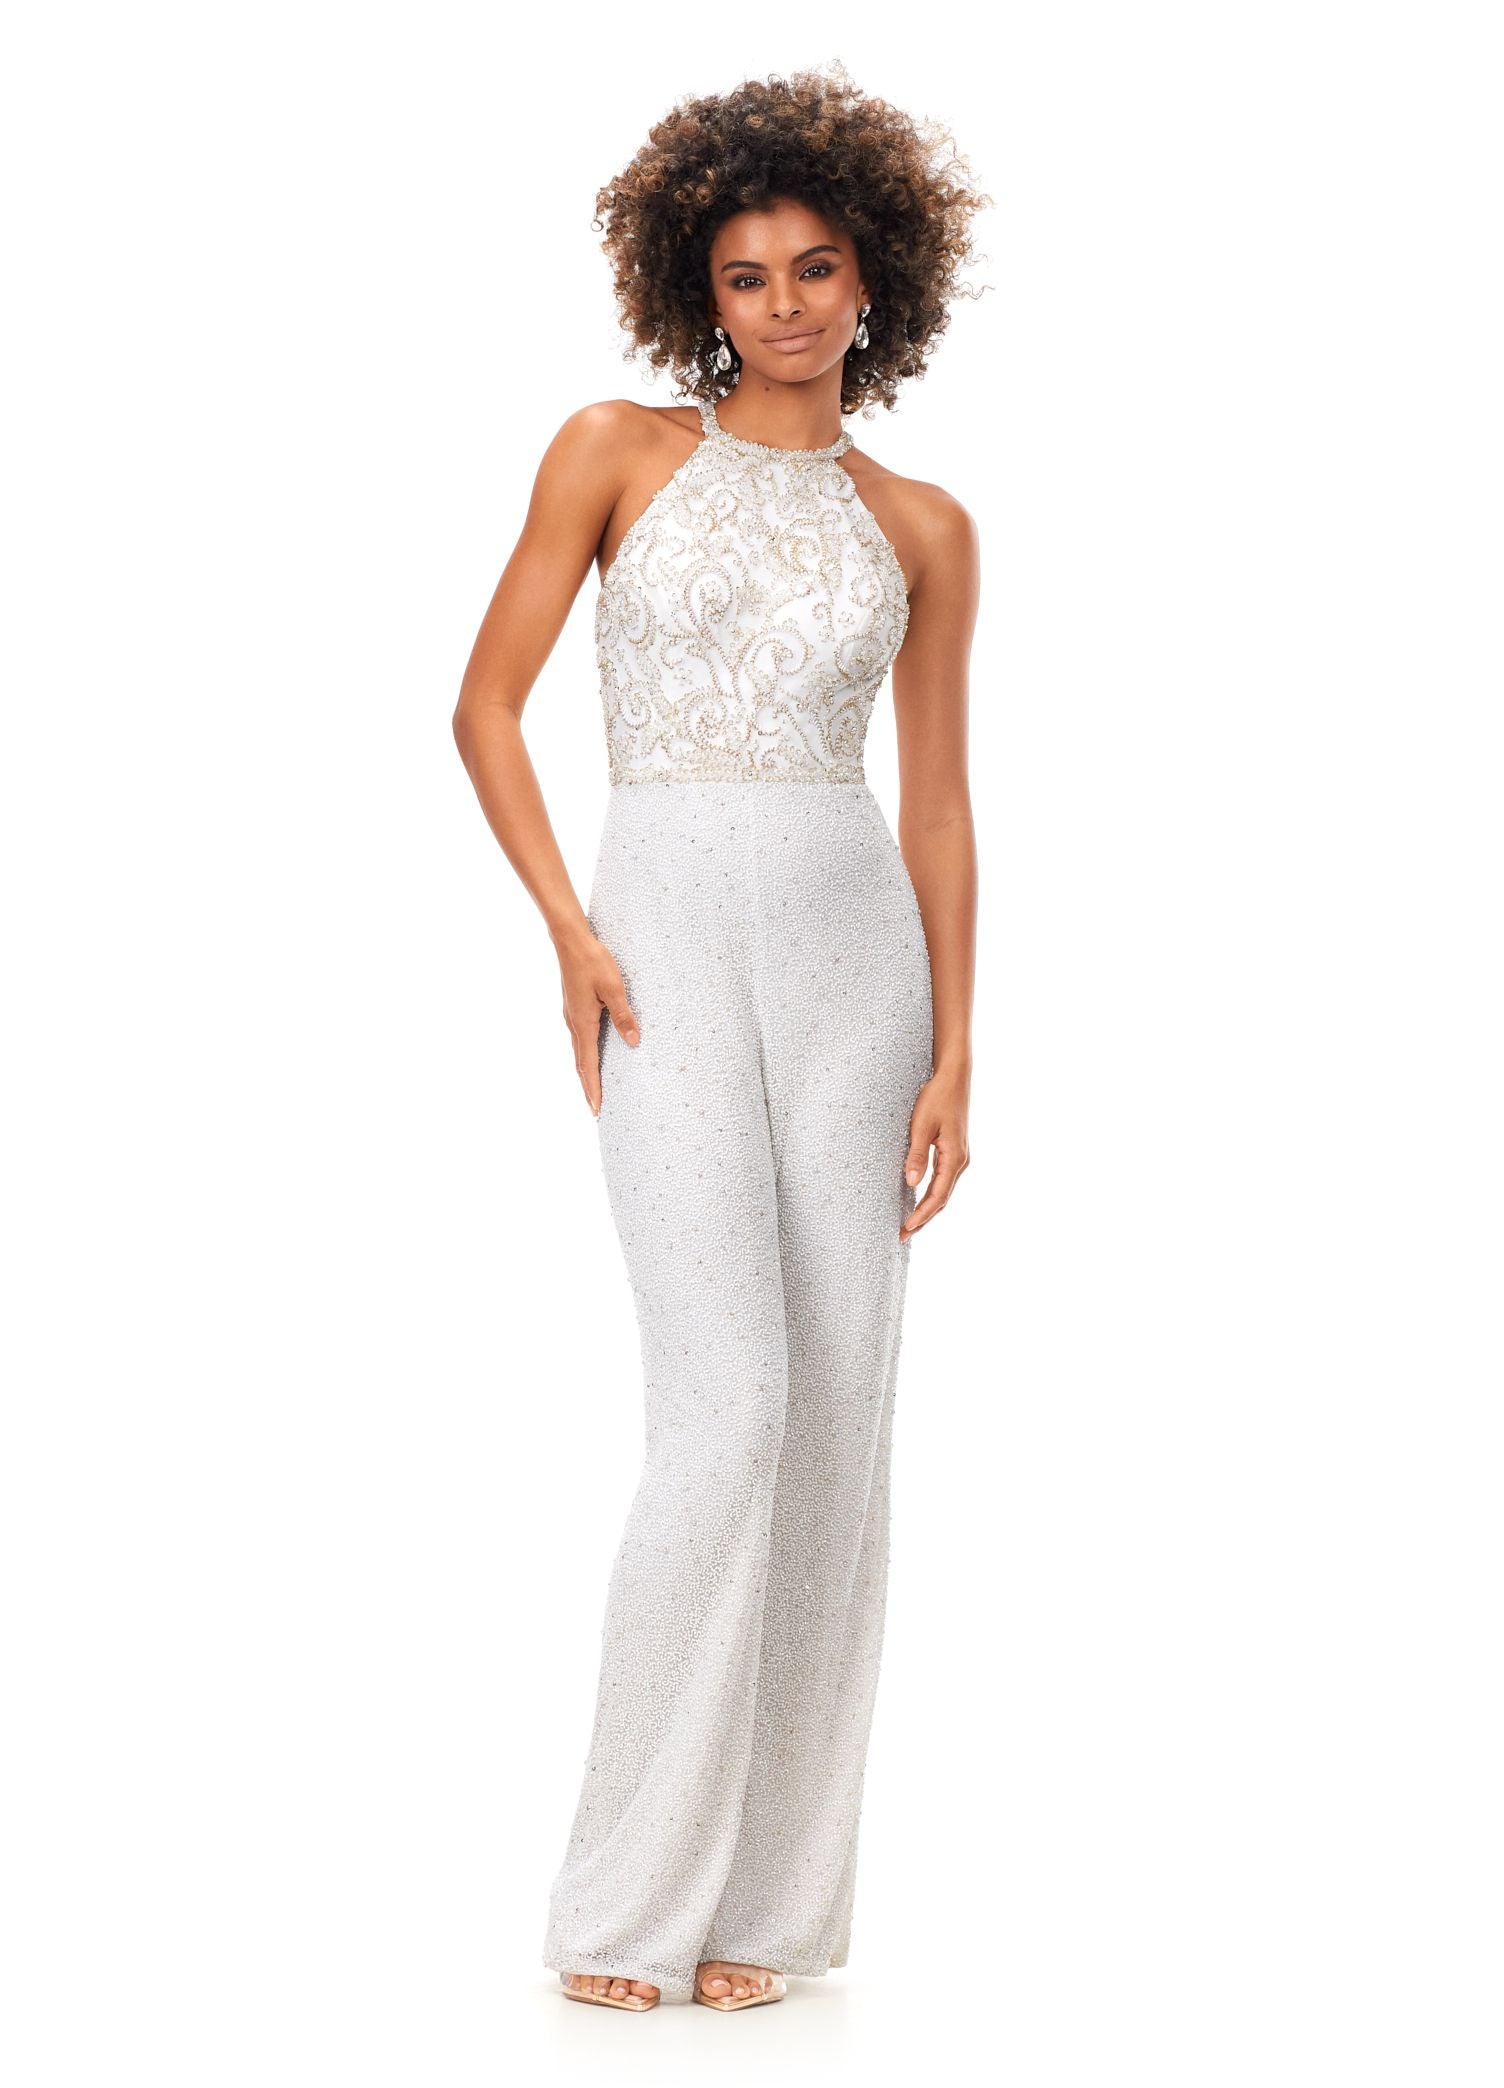 Ashley Lauren 11339 This unique halter style jumpsuit features an intricately beaded bodice, open back and wide leg pants. Halter Neckline Open Back Wide Leg Pants Fully Hand Beaded COLORS: Black, Ivory, Lilac